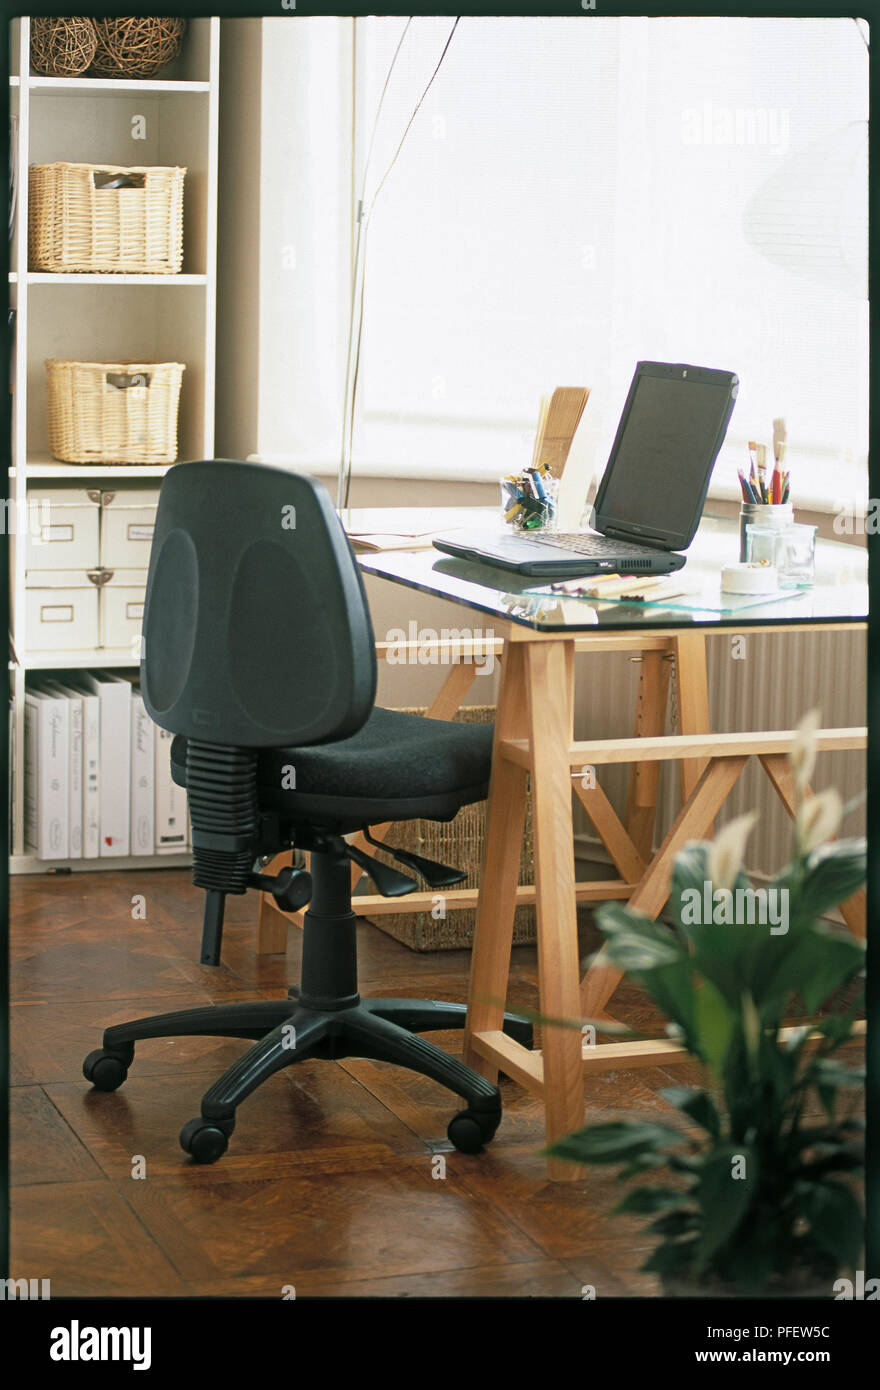 Chair with adjustment levers and desk with lap-top computer. Stock Photo